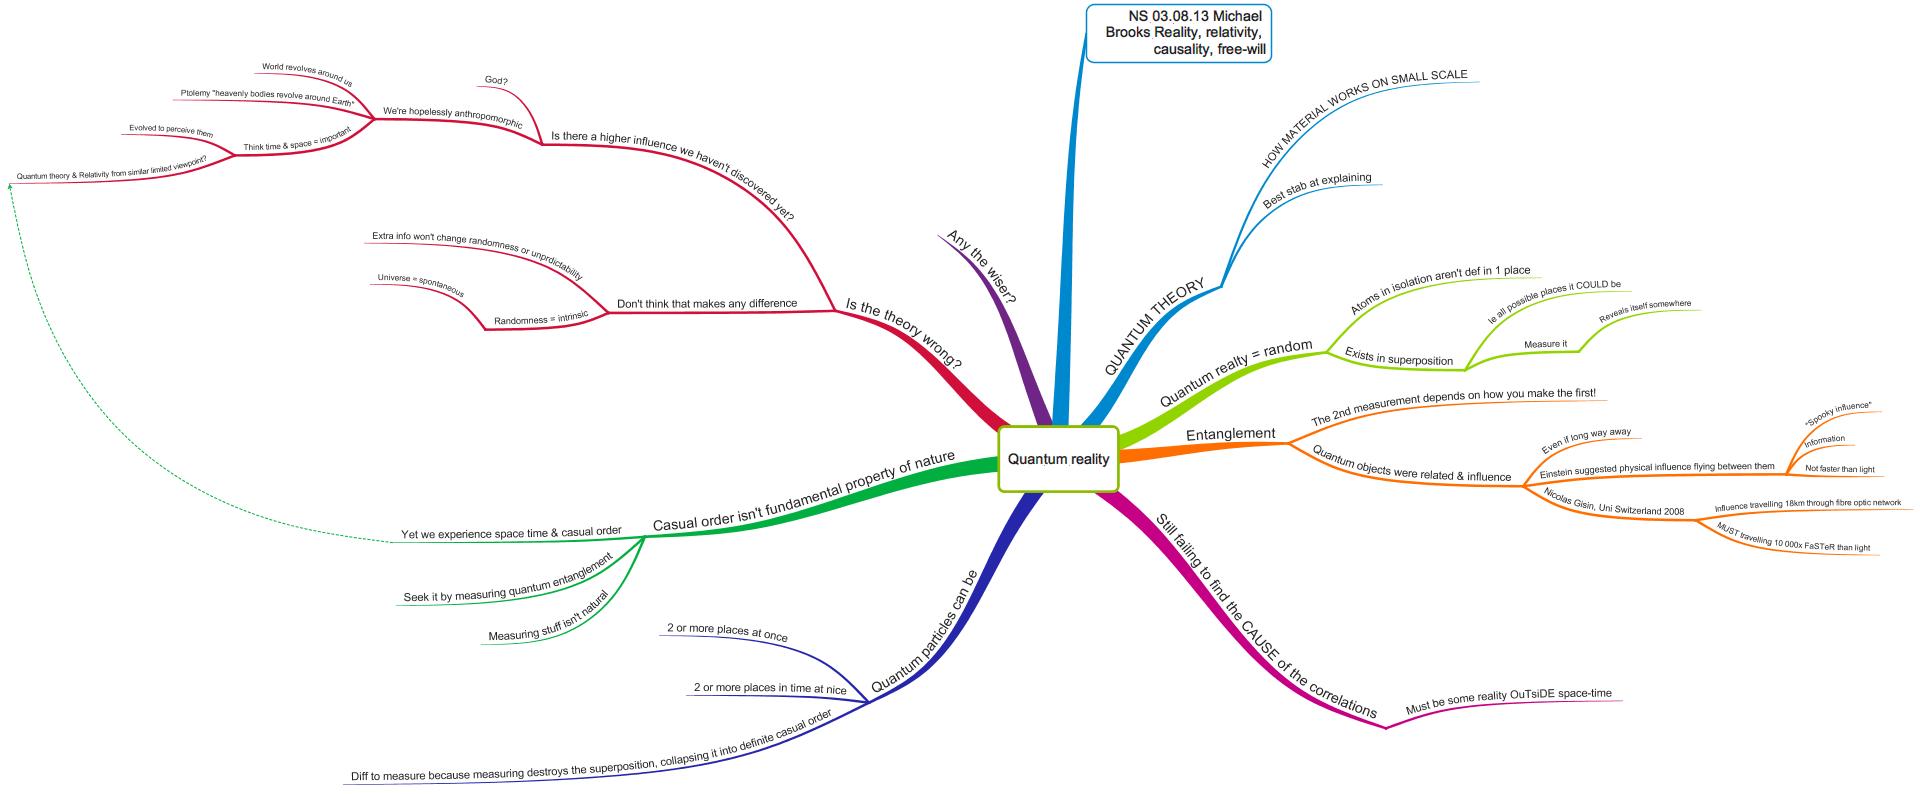 Organise yourself with MindMaps